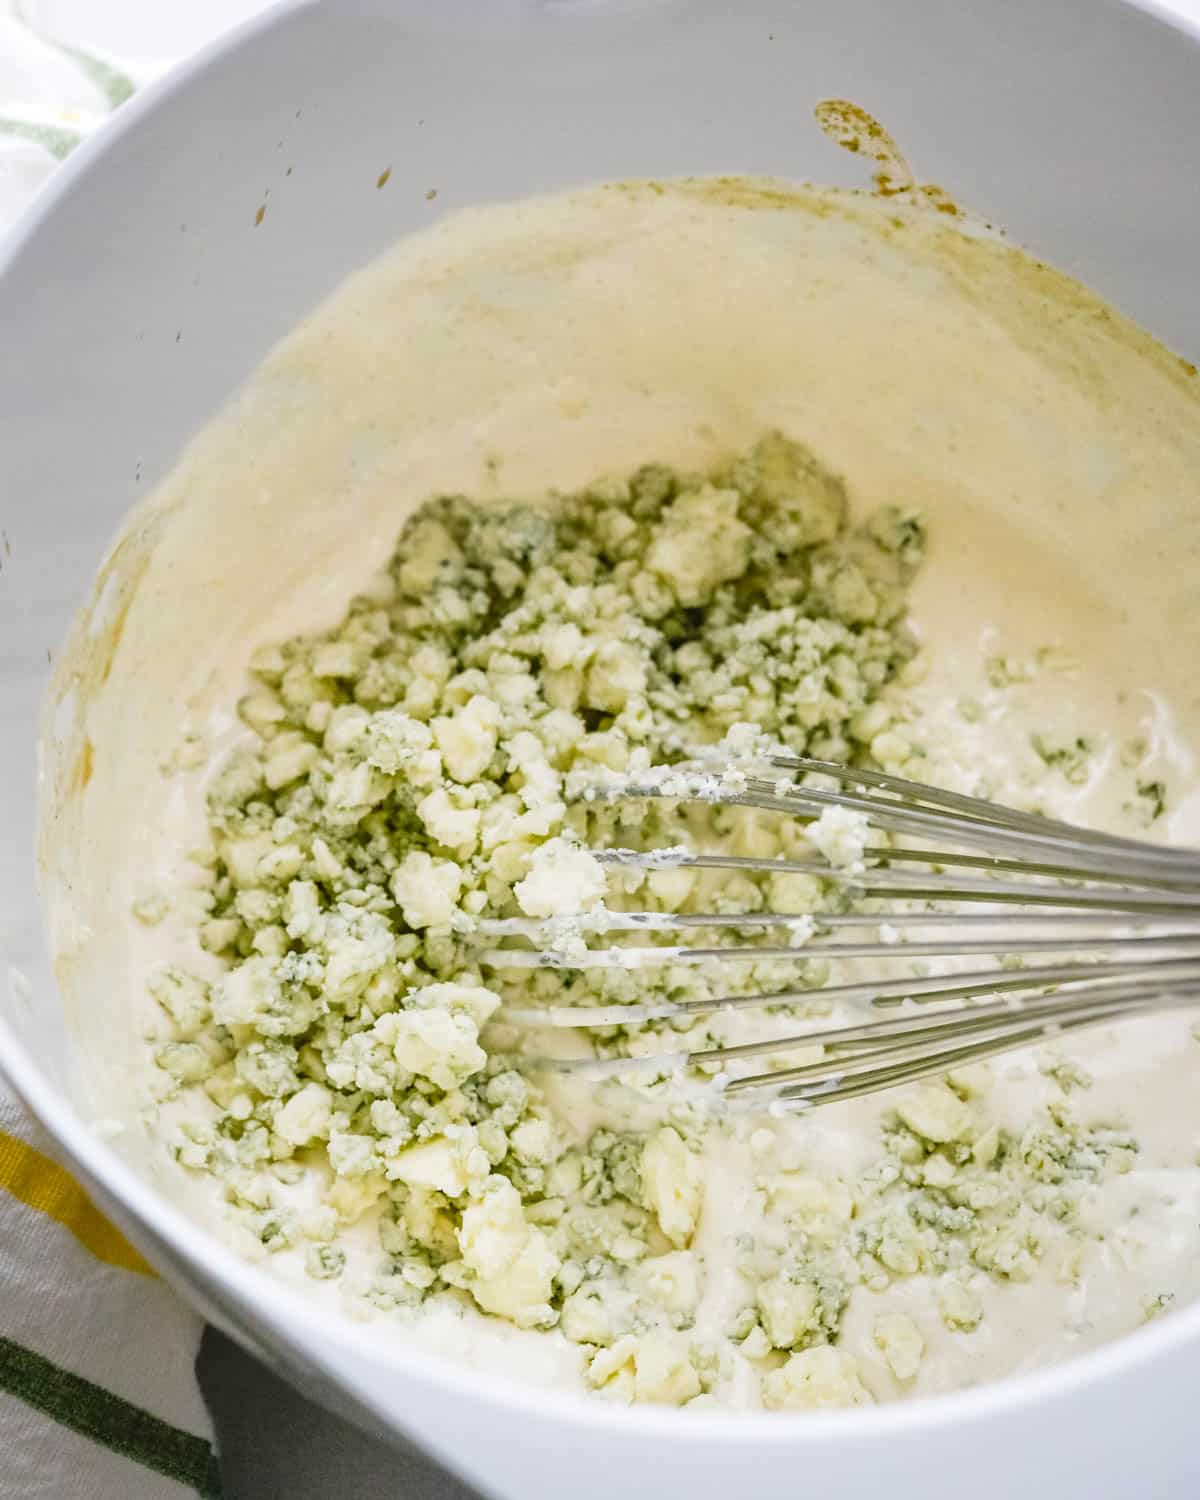 We are adding blue cheese crumbles to the bowl.